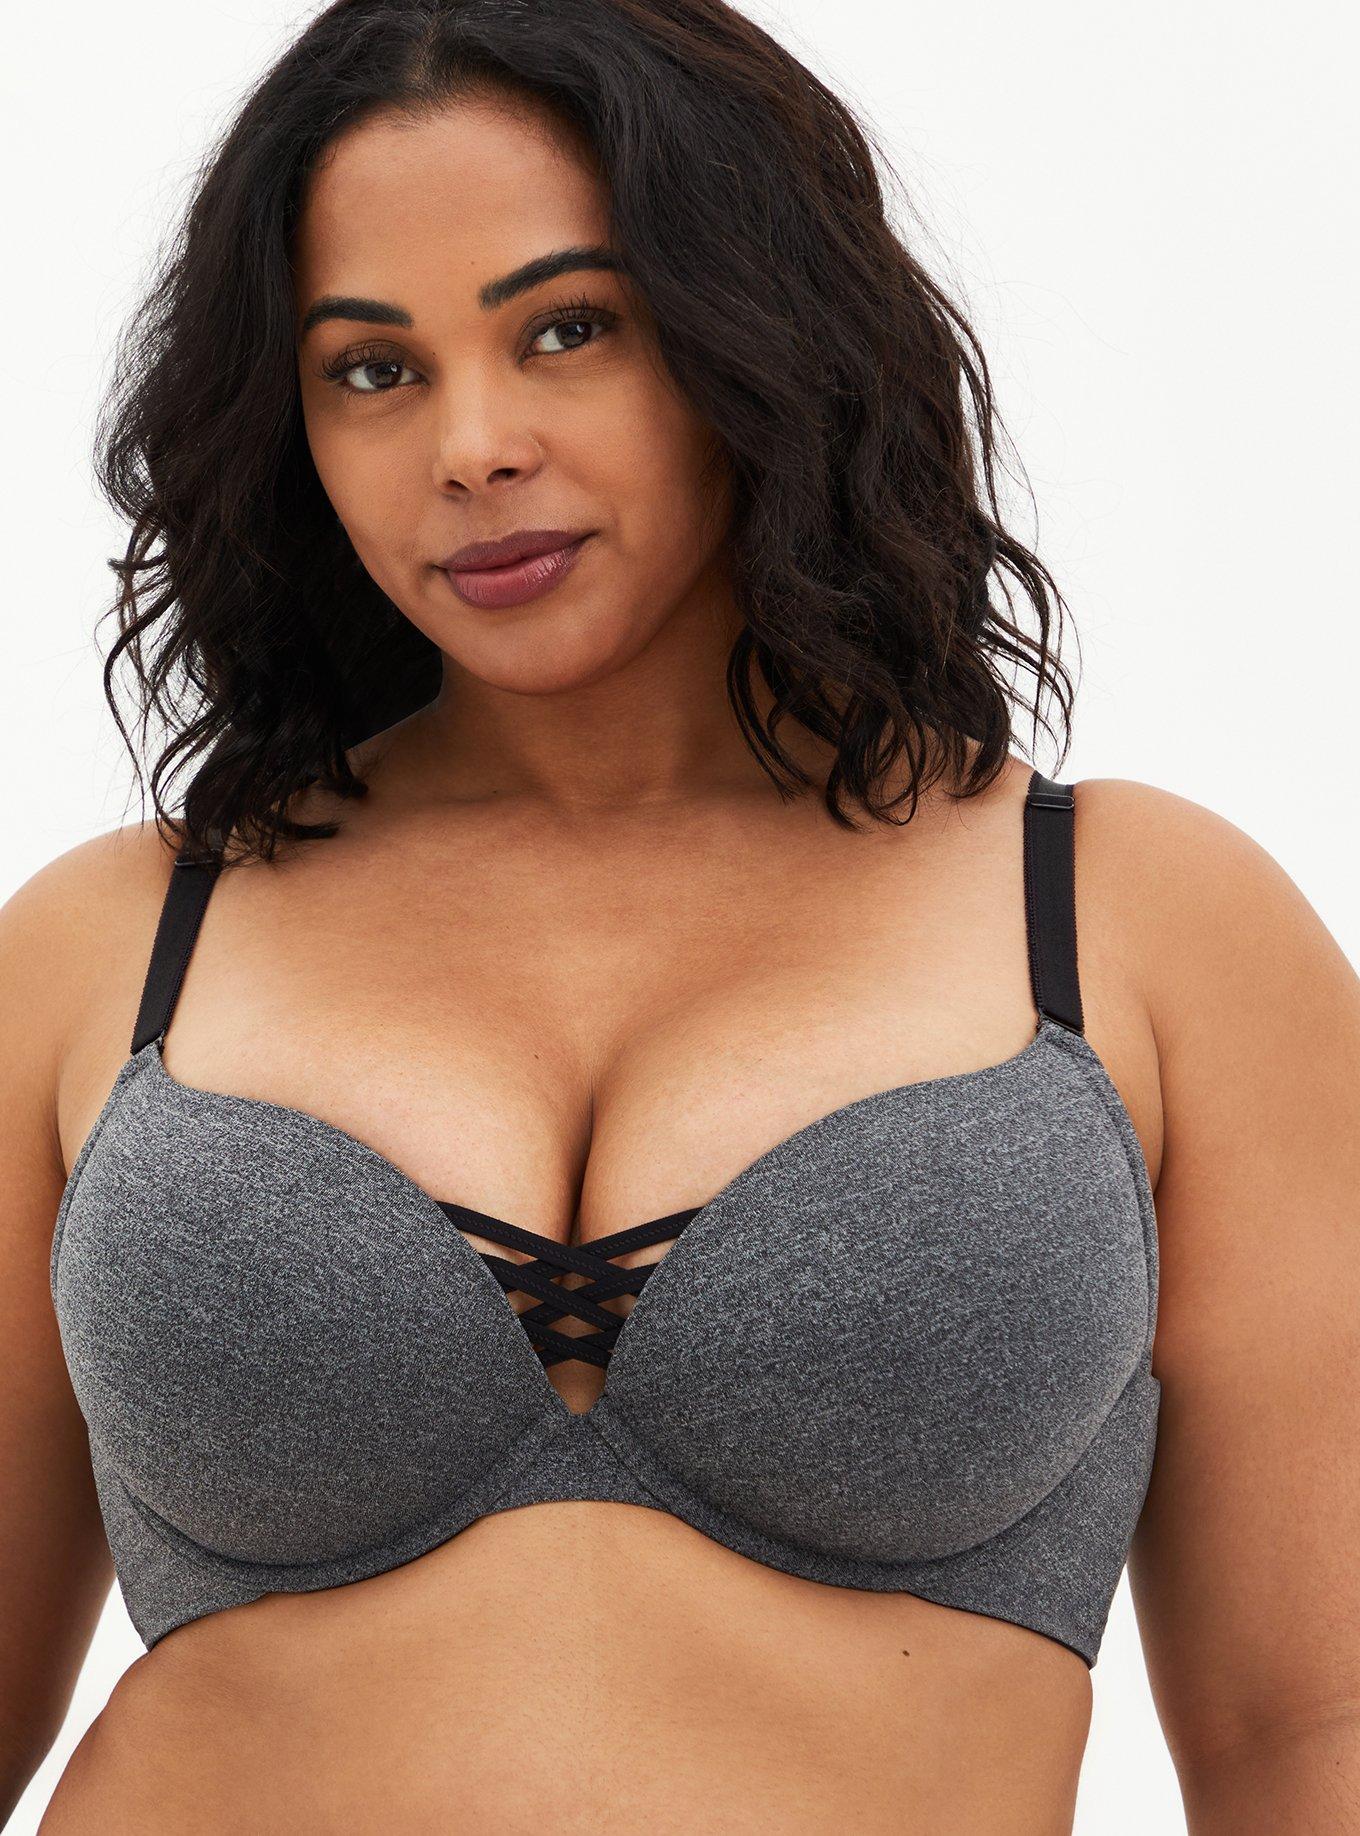 Thickening cup plus size bra push up Small breast size code bras